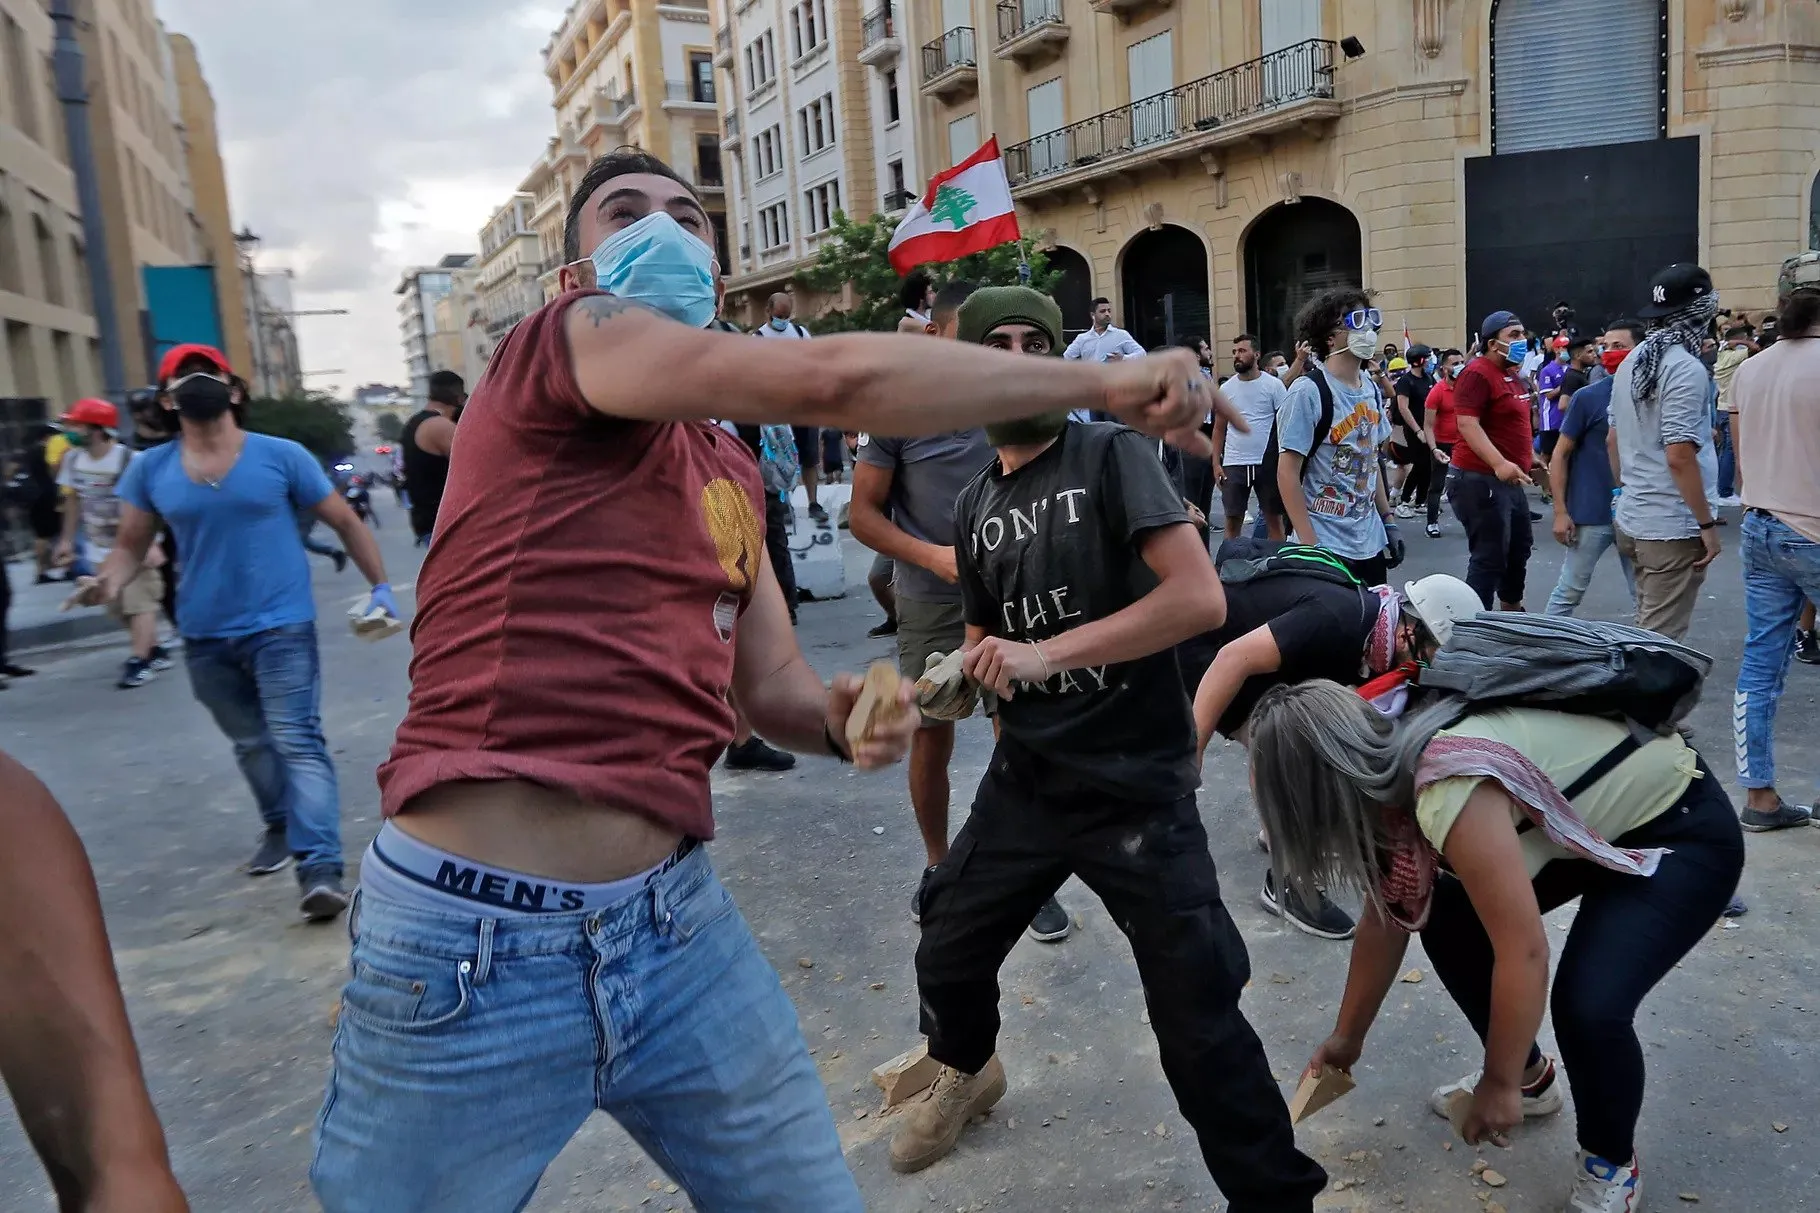 Lebanese protesters, enraged by last week’s deadly Beirut explosion, hurl stones at security forces amid clashes in the vicinity of the parliament building in central Beirut on August 10, 2020. Joseph Eid/AFP via Getty Images